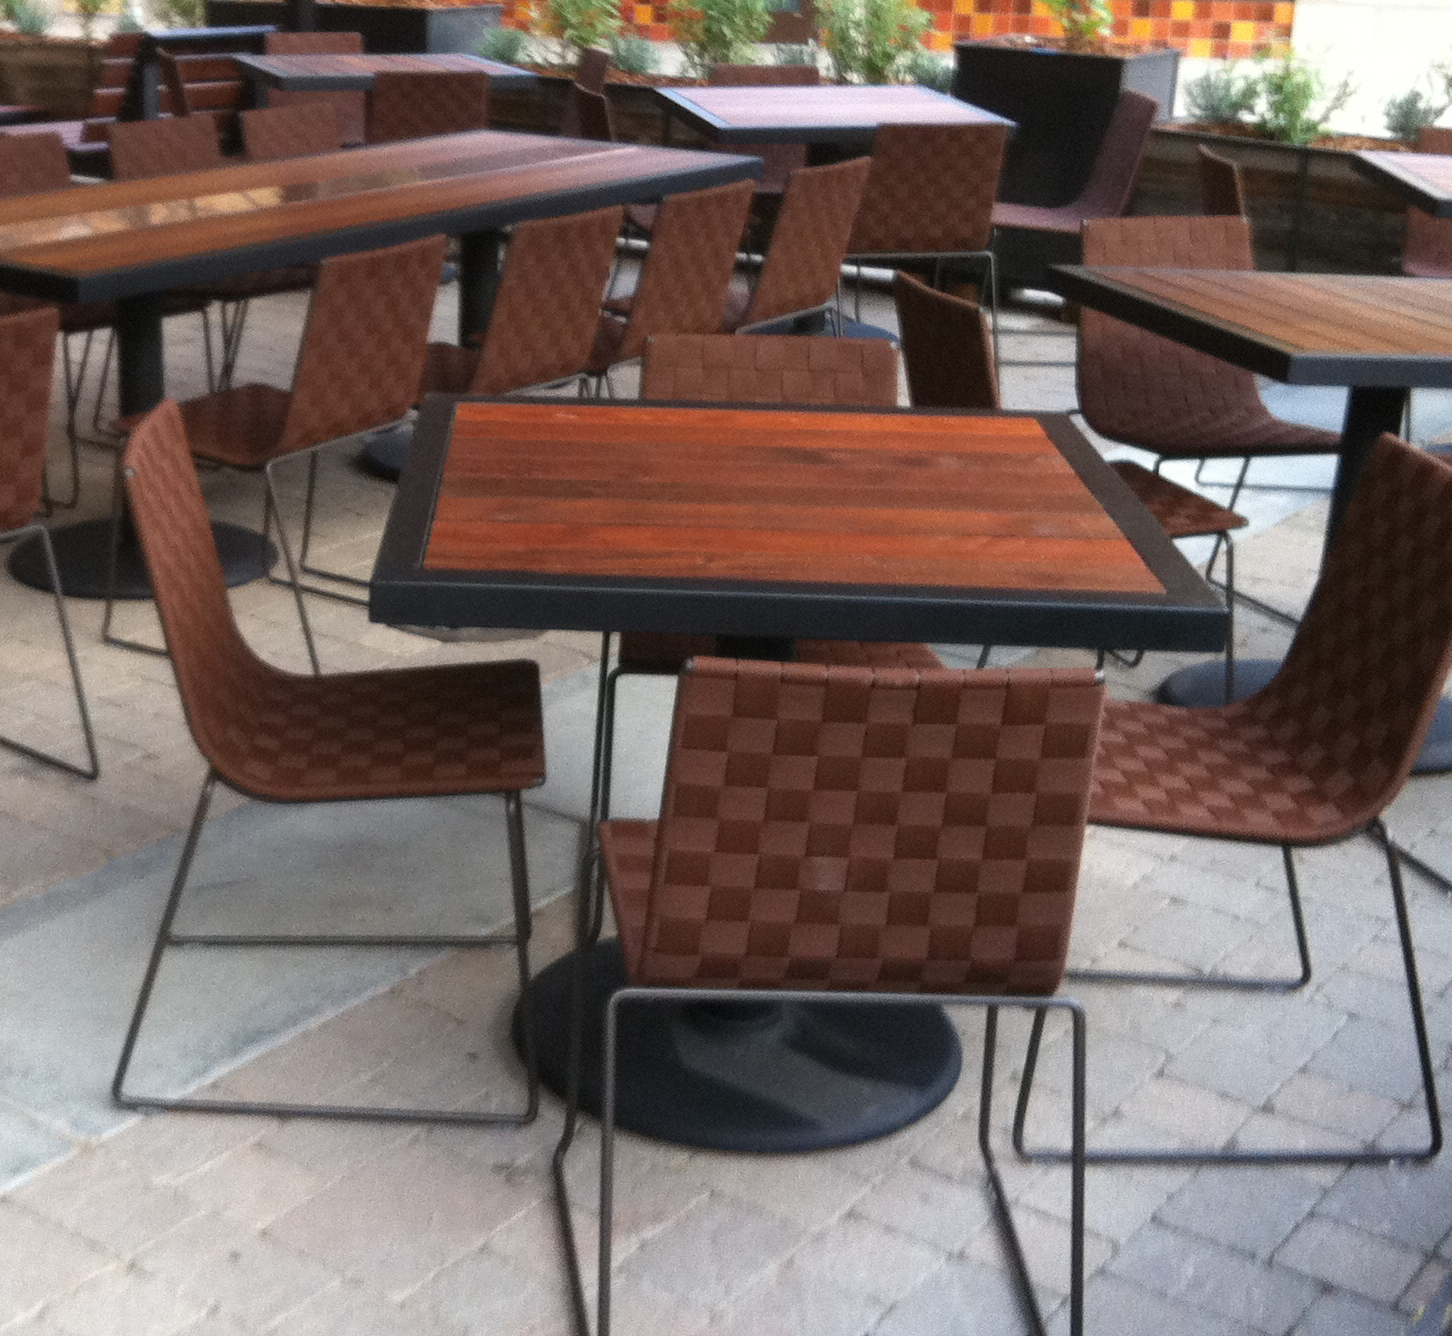 Outdoor tables 02 cropped.jpg